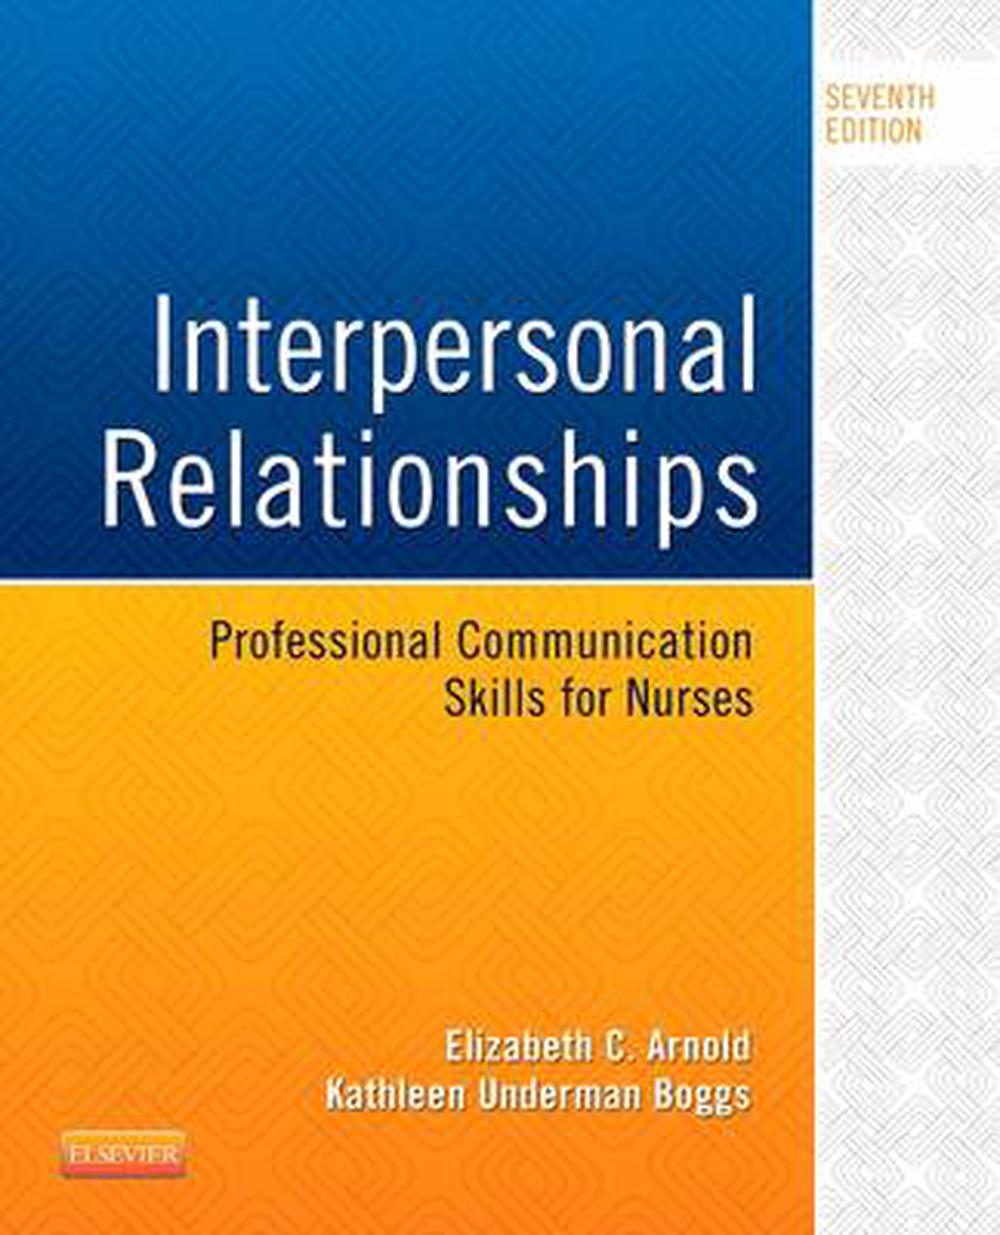 Interpersonal Relationships, 7th Edition by Elizabeth C